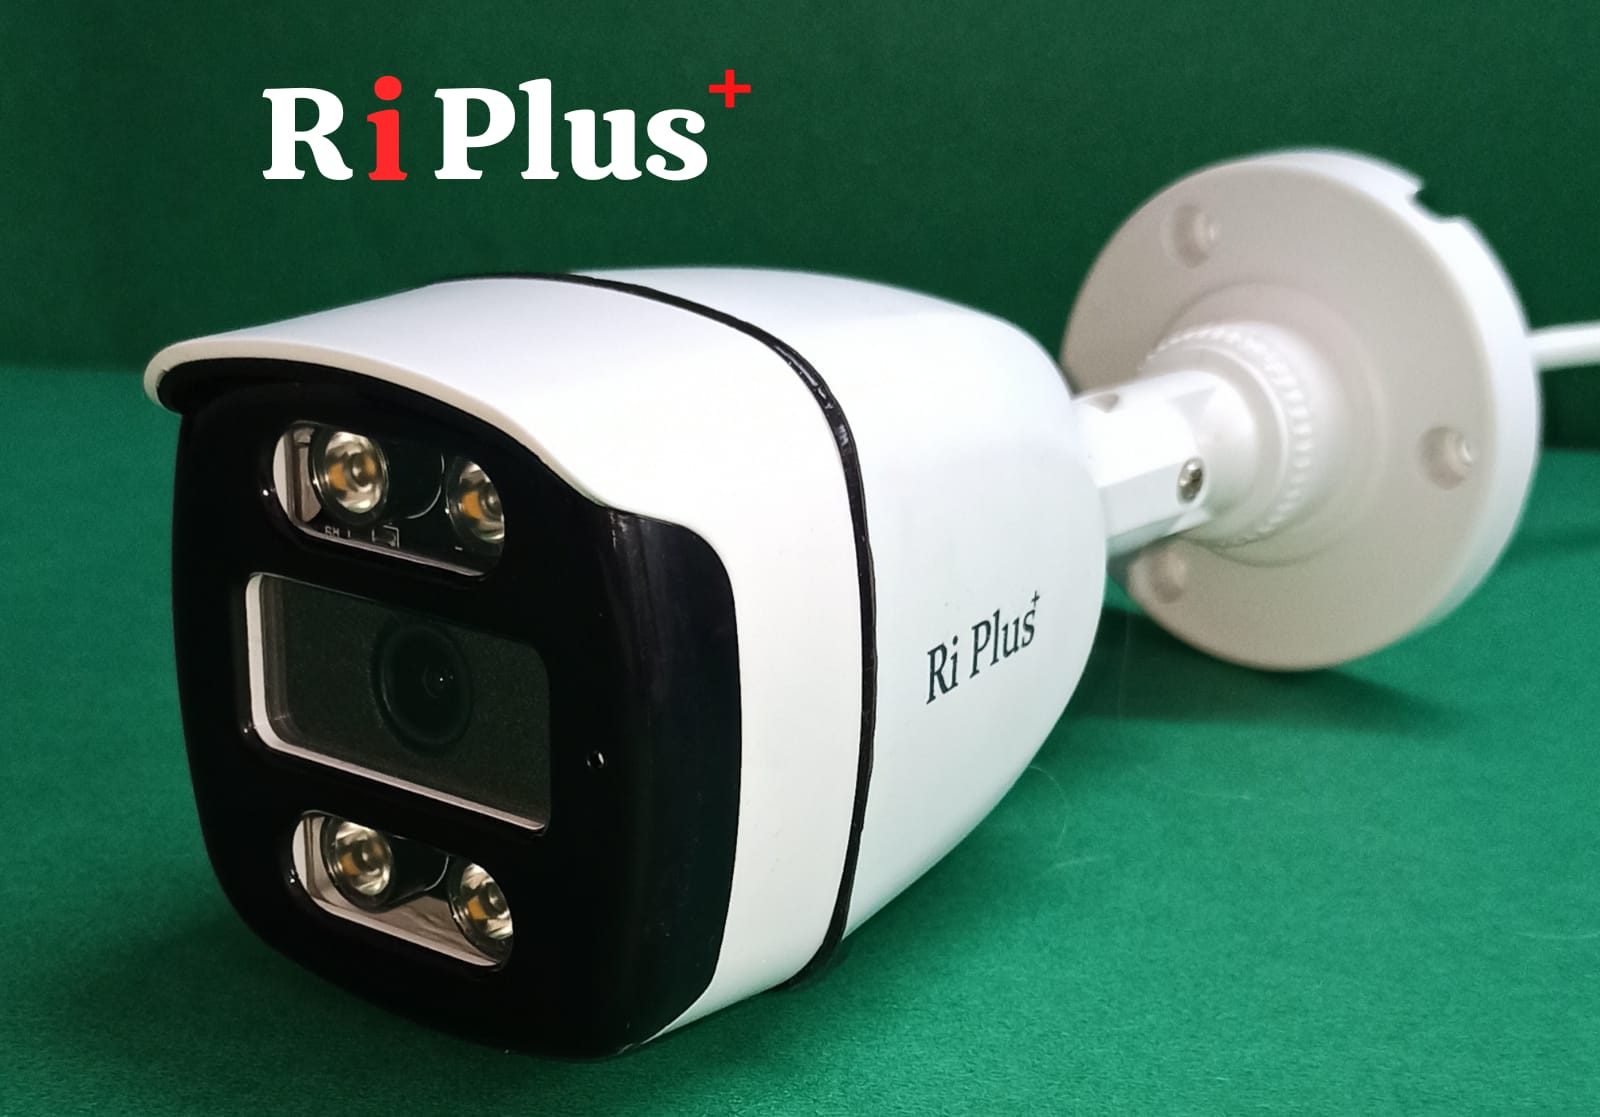 RIPLUS 	CCTV MOST TRUSTED BRAND IN INDIAServicesEverything ElseCentral DelhiOther